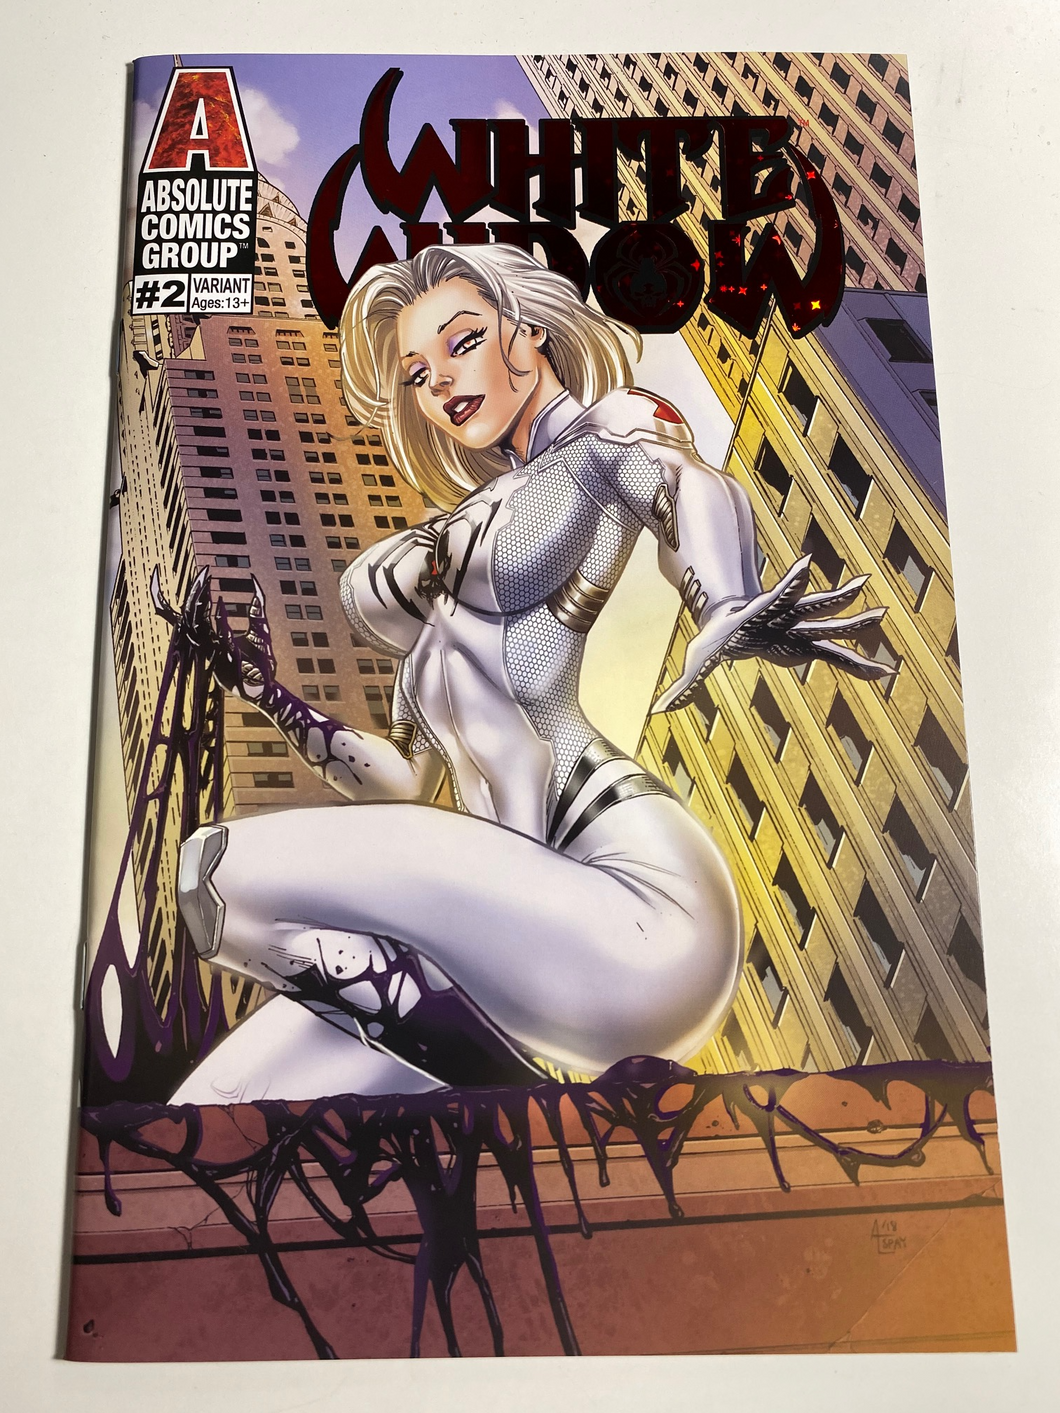 WHITE WIDOW #2 ANTHONY SPAY RED FOIL LOGO VARIANT